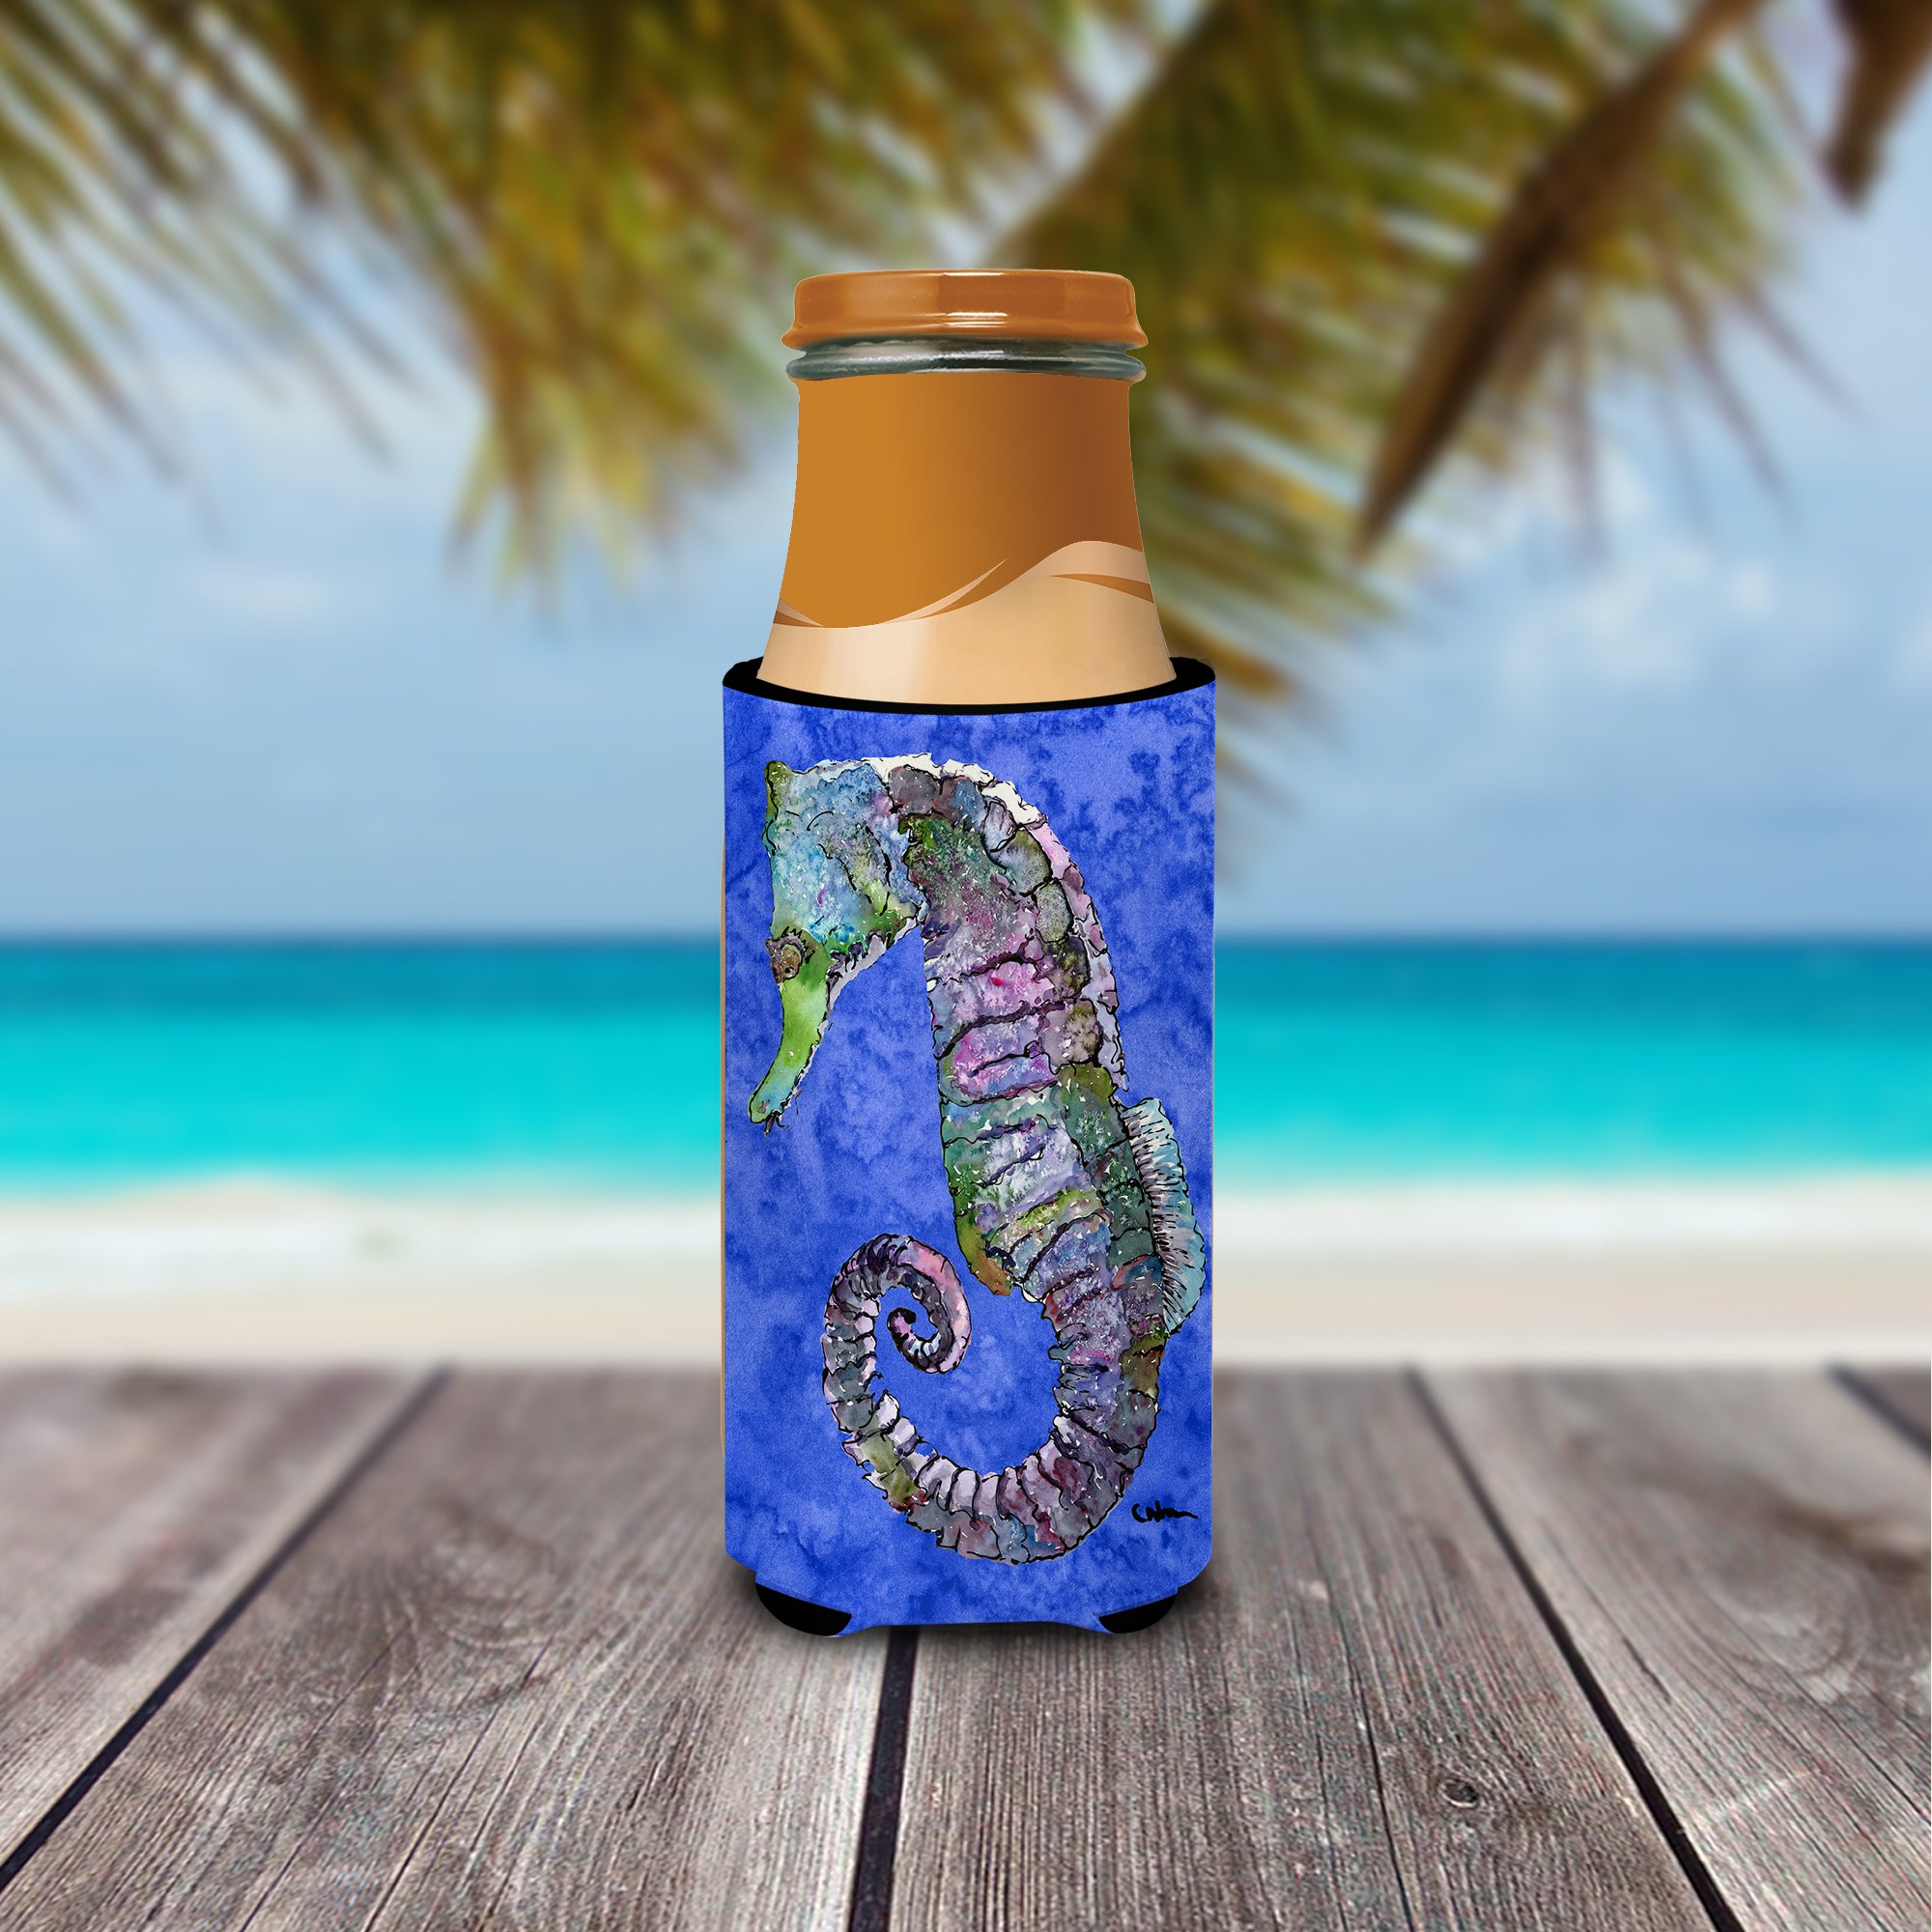 Seahorse Ultra Beverage Insulators for slim cans 8639MUK.